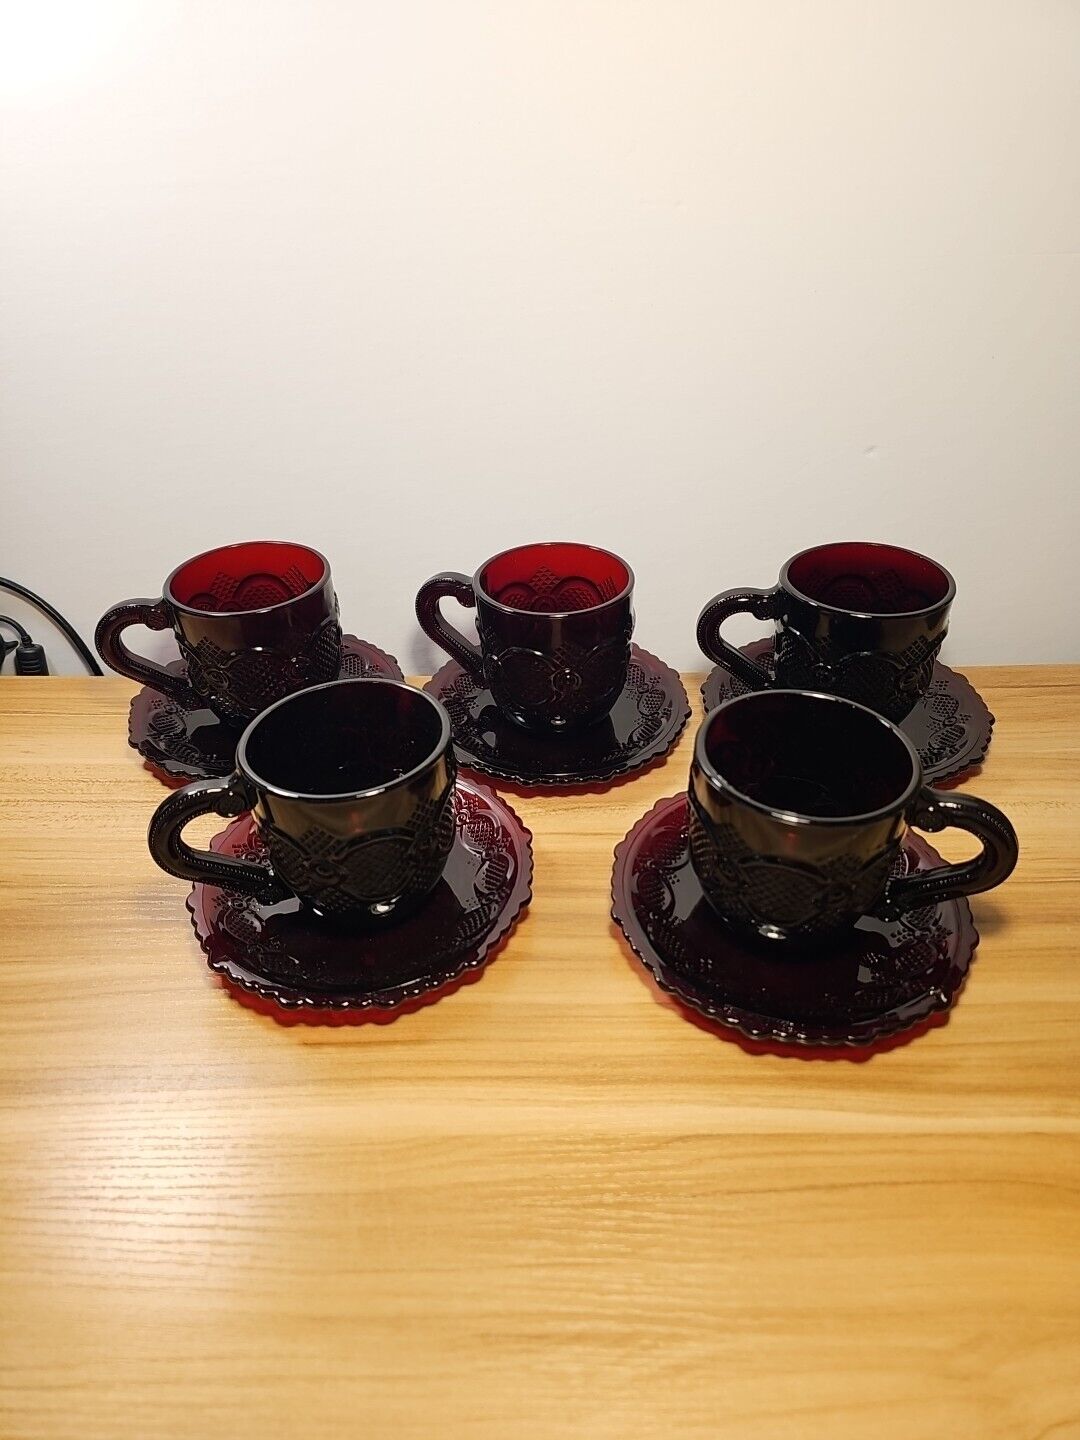 AVON 1876 Ruby Red Cape Collection Set of 5 Cup & Saucer Sets Gothic 